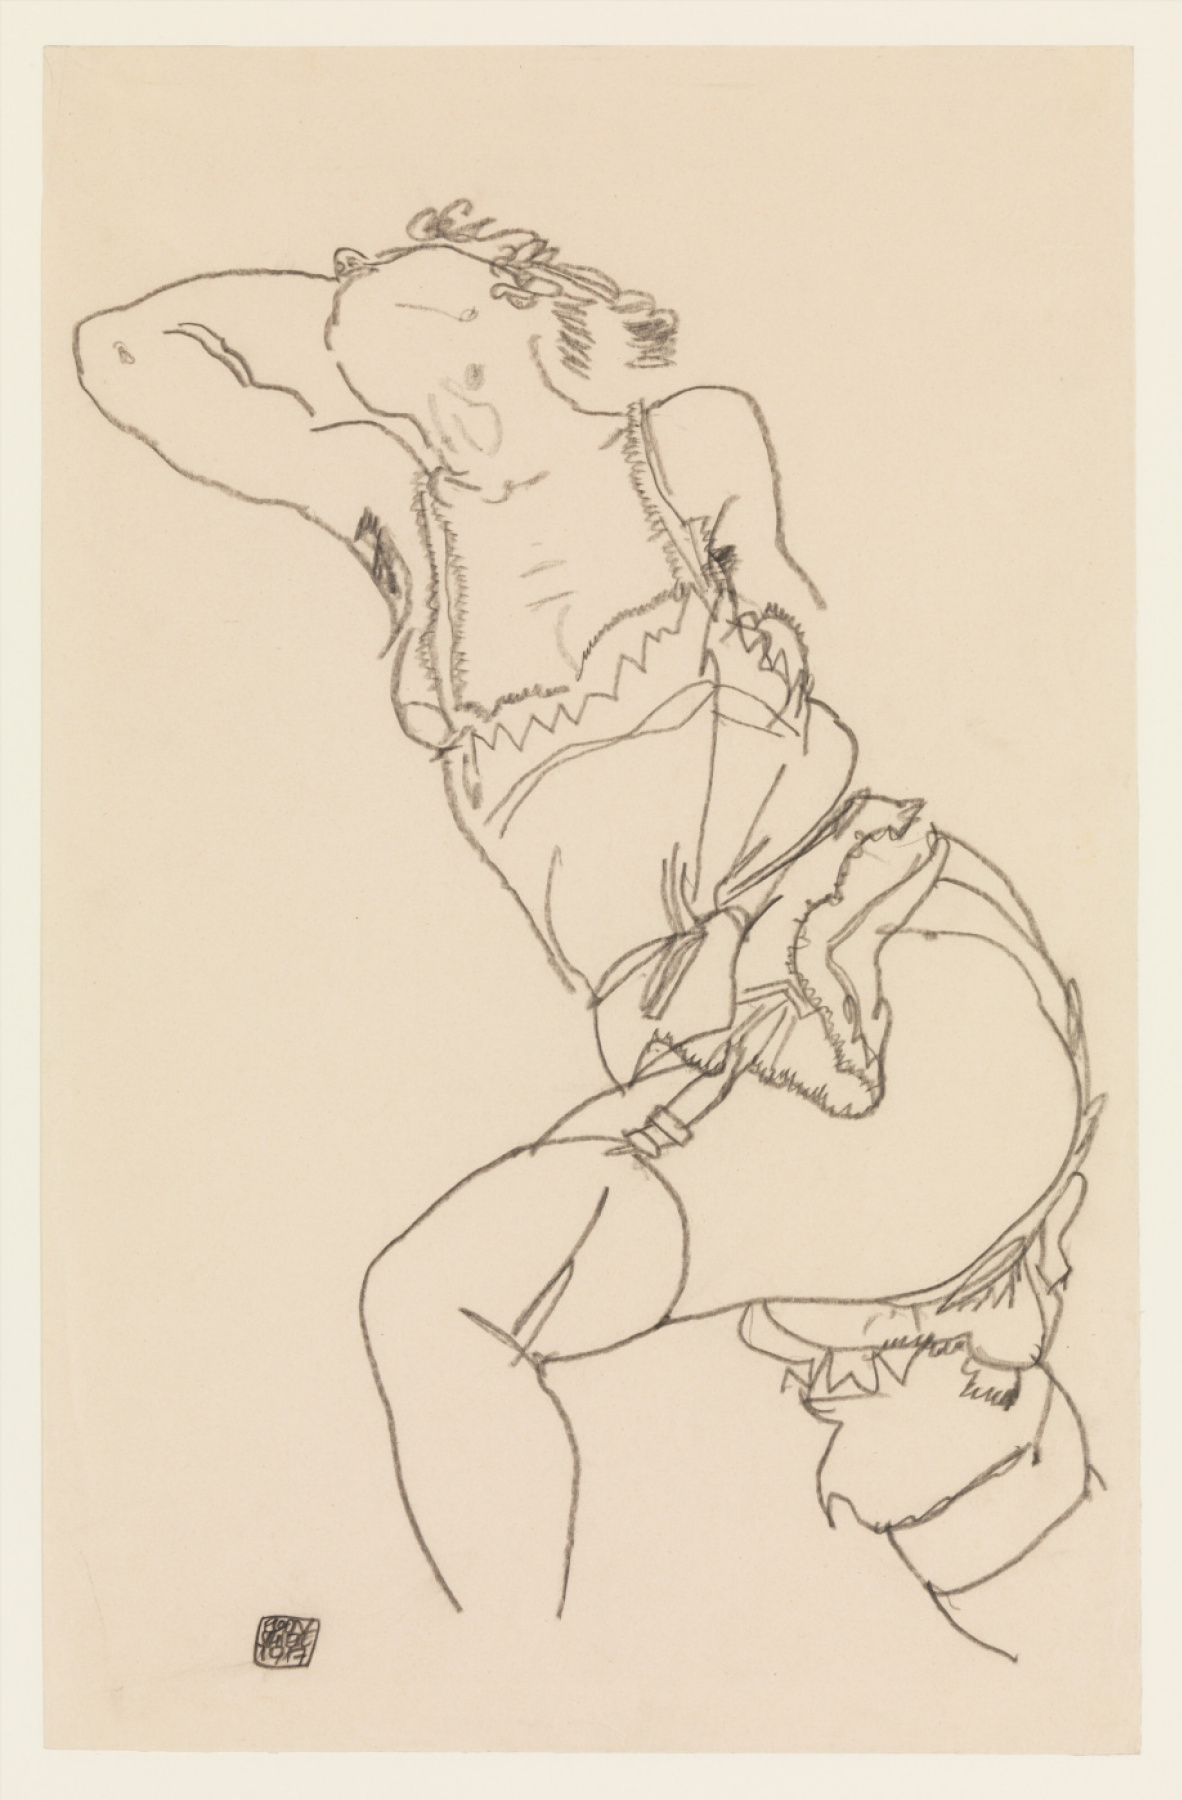 Egon Schiele. Reclining Model in Chemise and Stockings